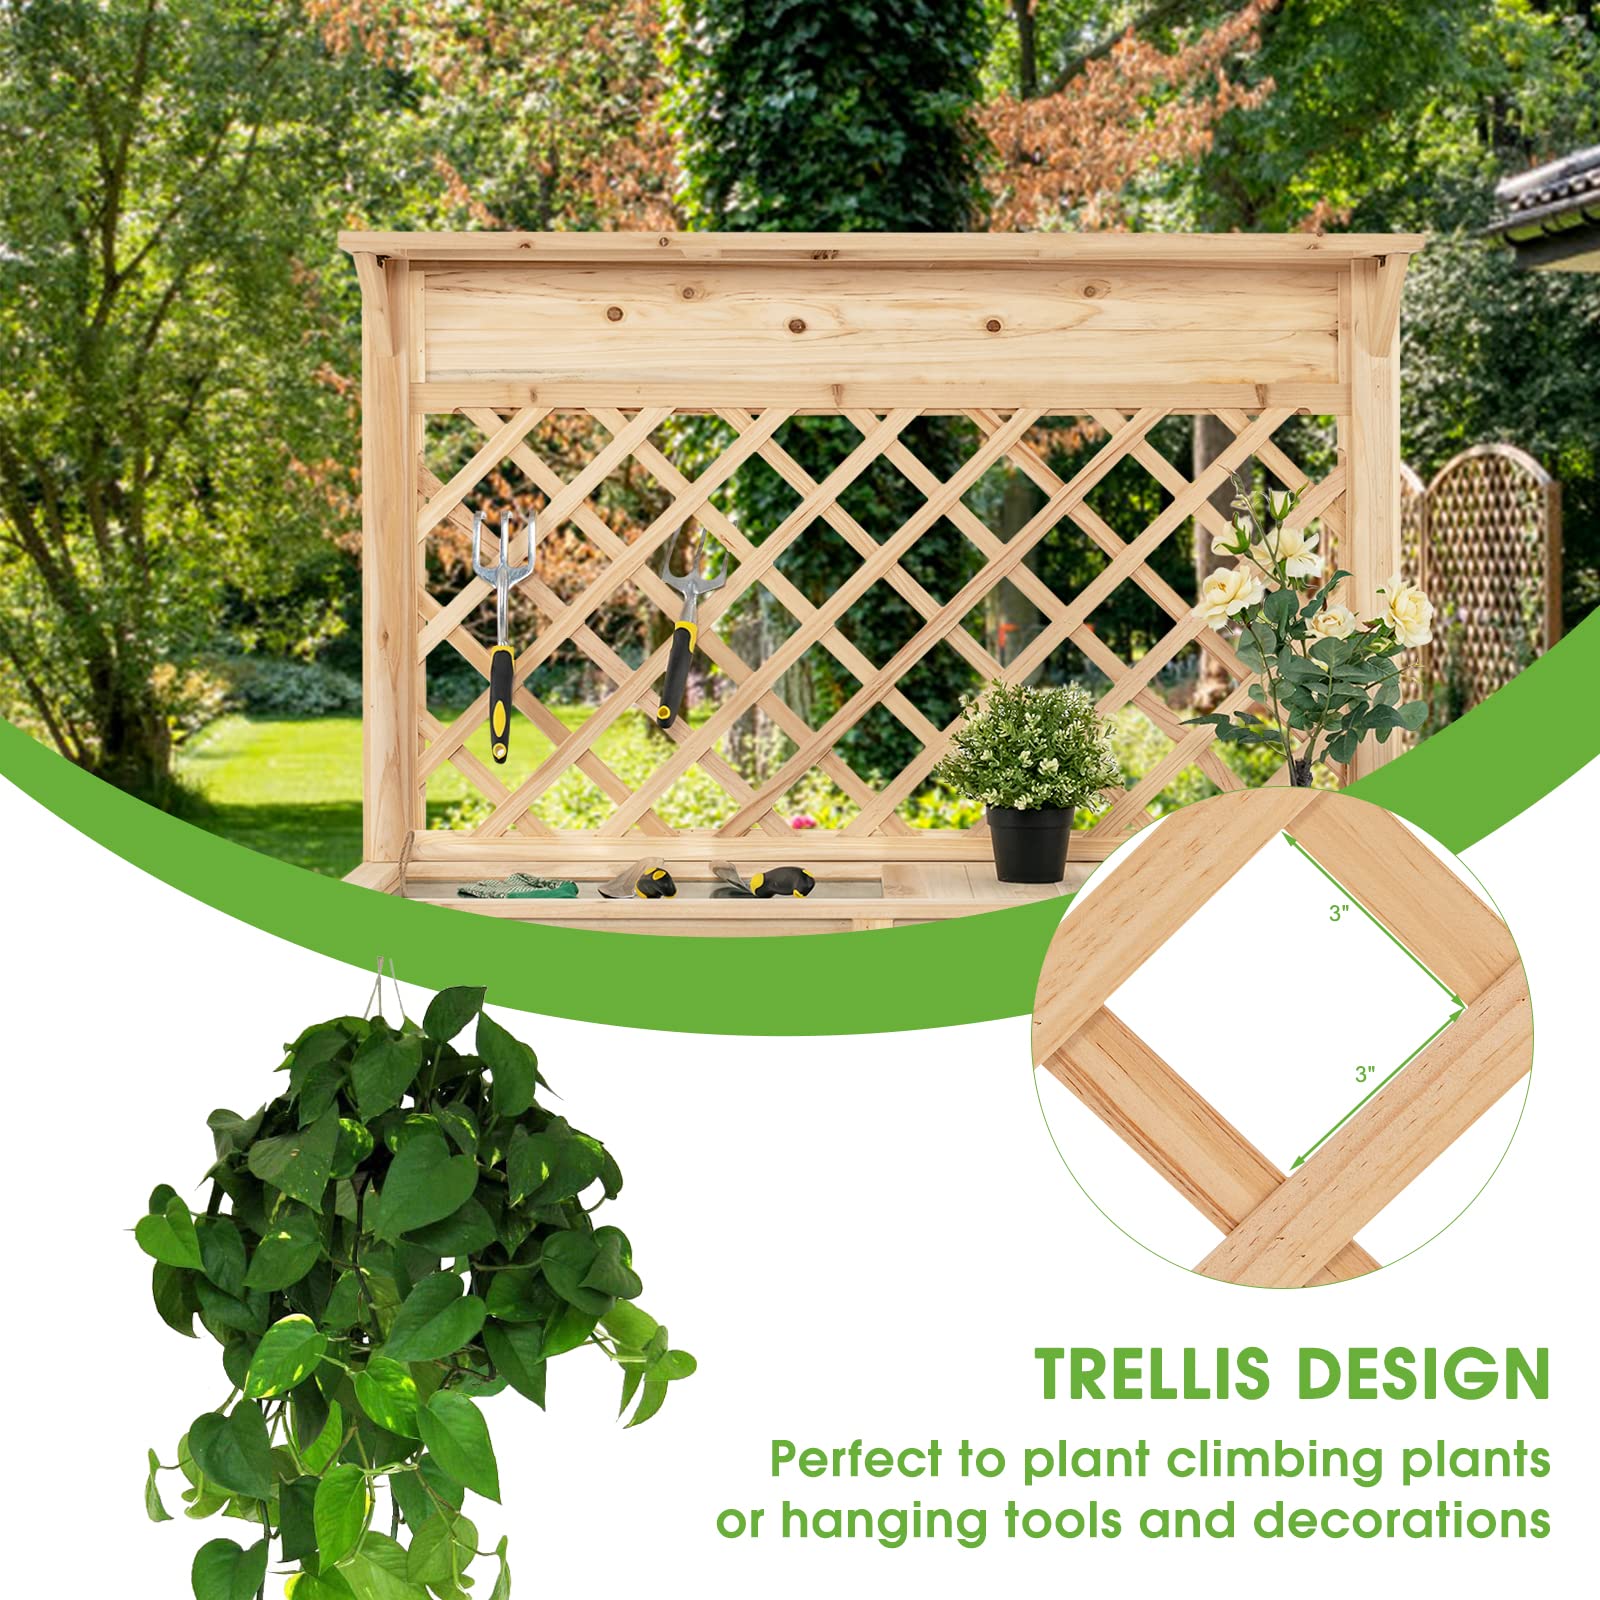 Giantex Wood Raised Garden Bed with Trellis, Freestanding Elevated Planter Box with Open Storage Shelf and Drawer